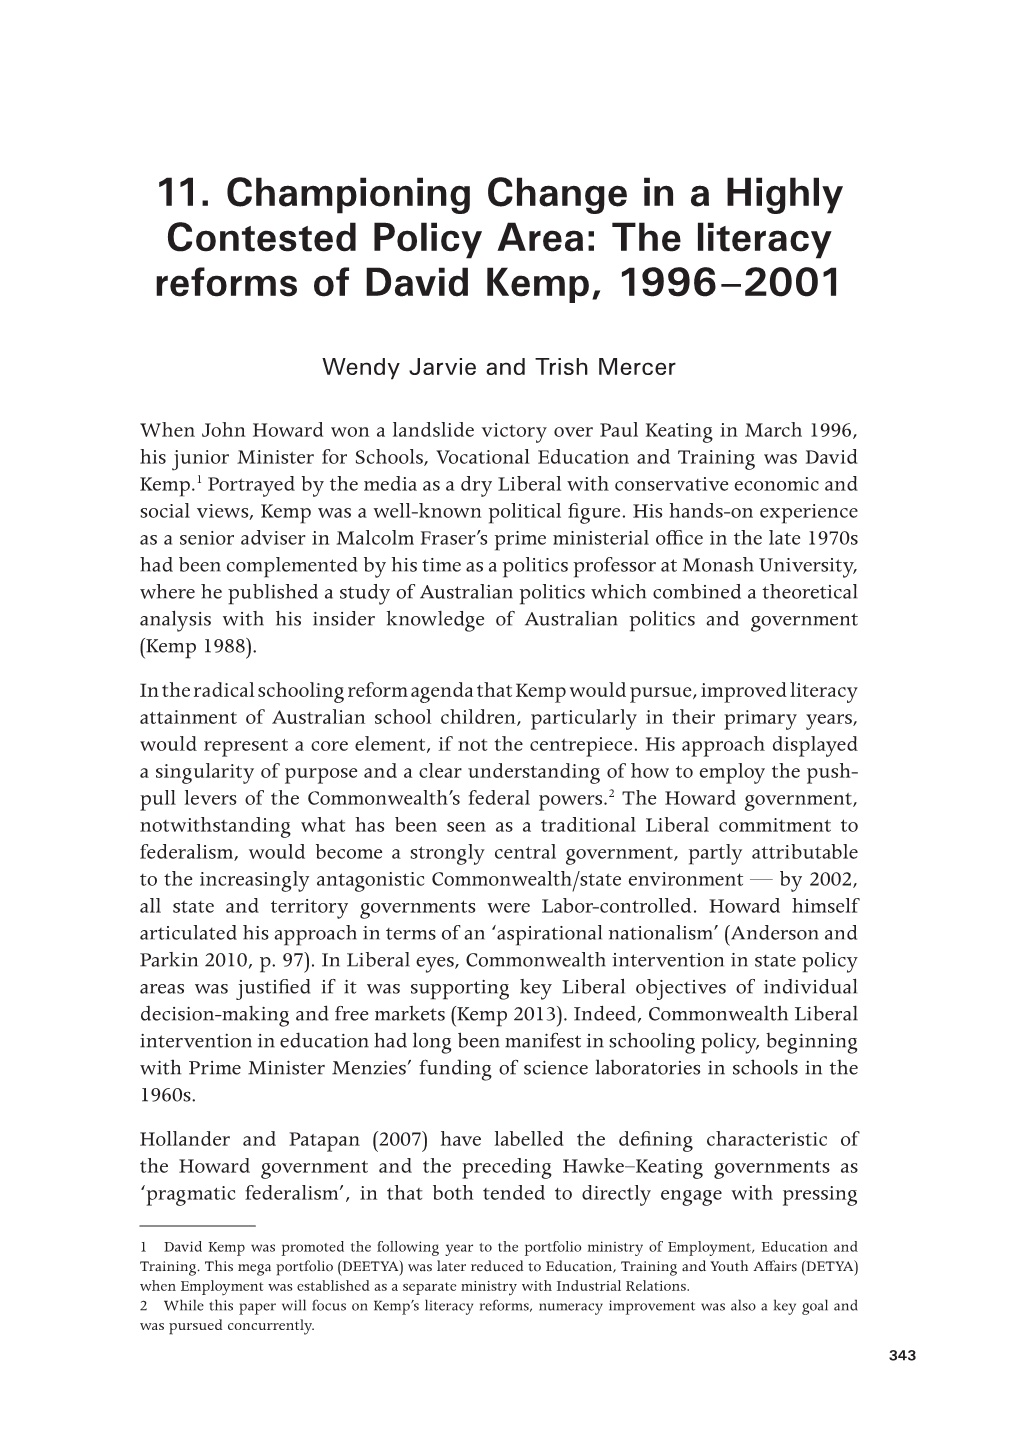 11. Championing Change in a Highly Contested Policy Area: the Literacy Reforms of David Kemp, 1996–2001